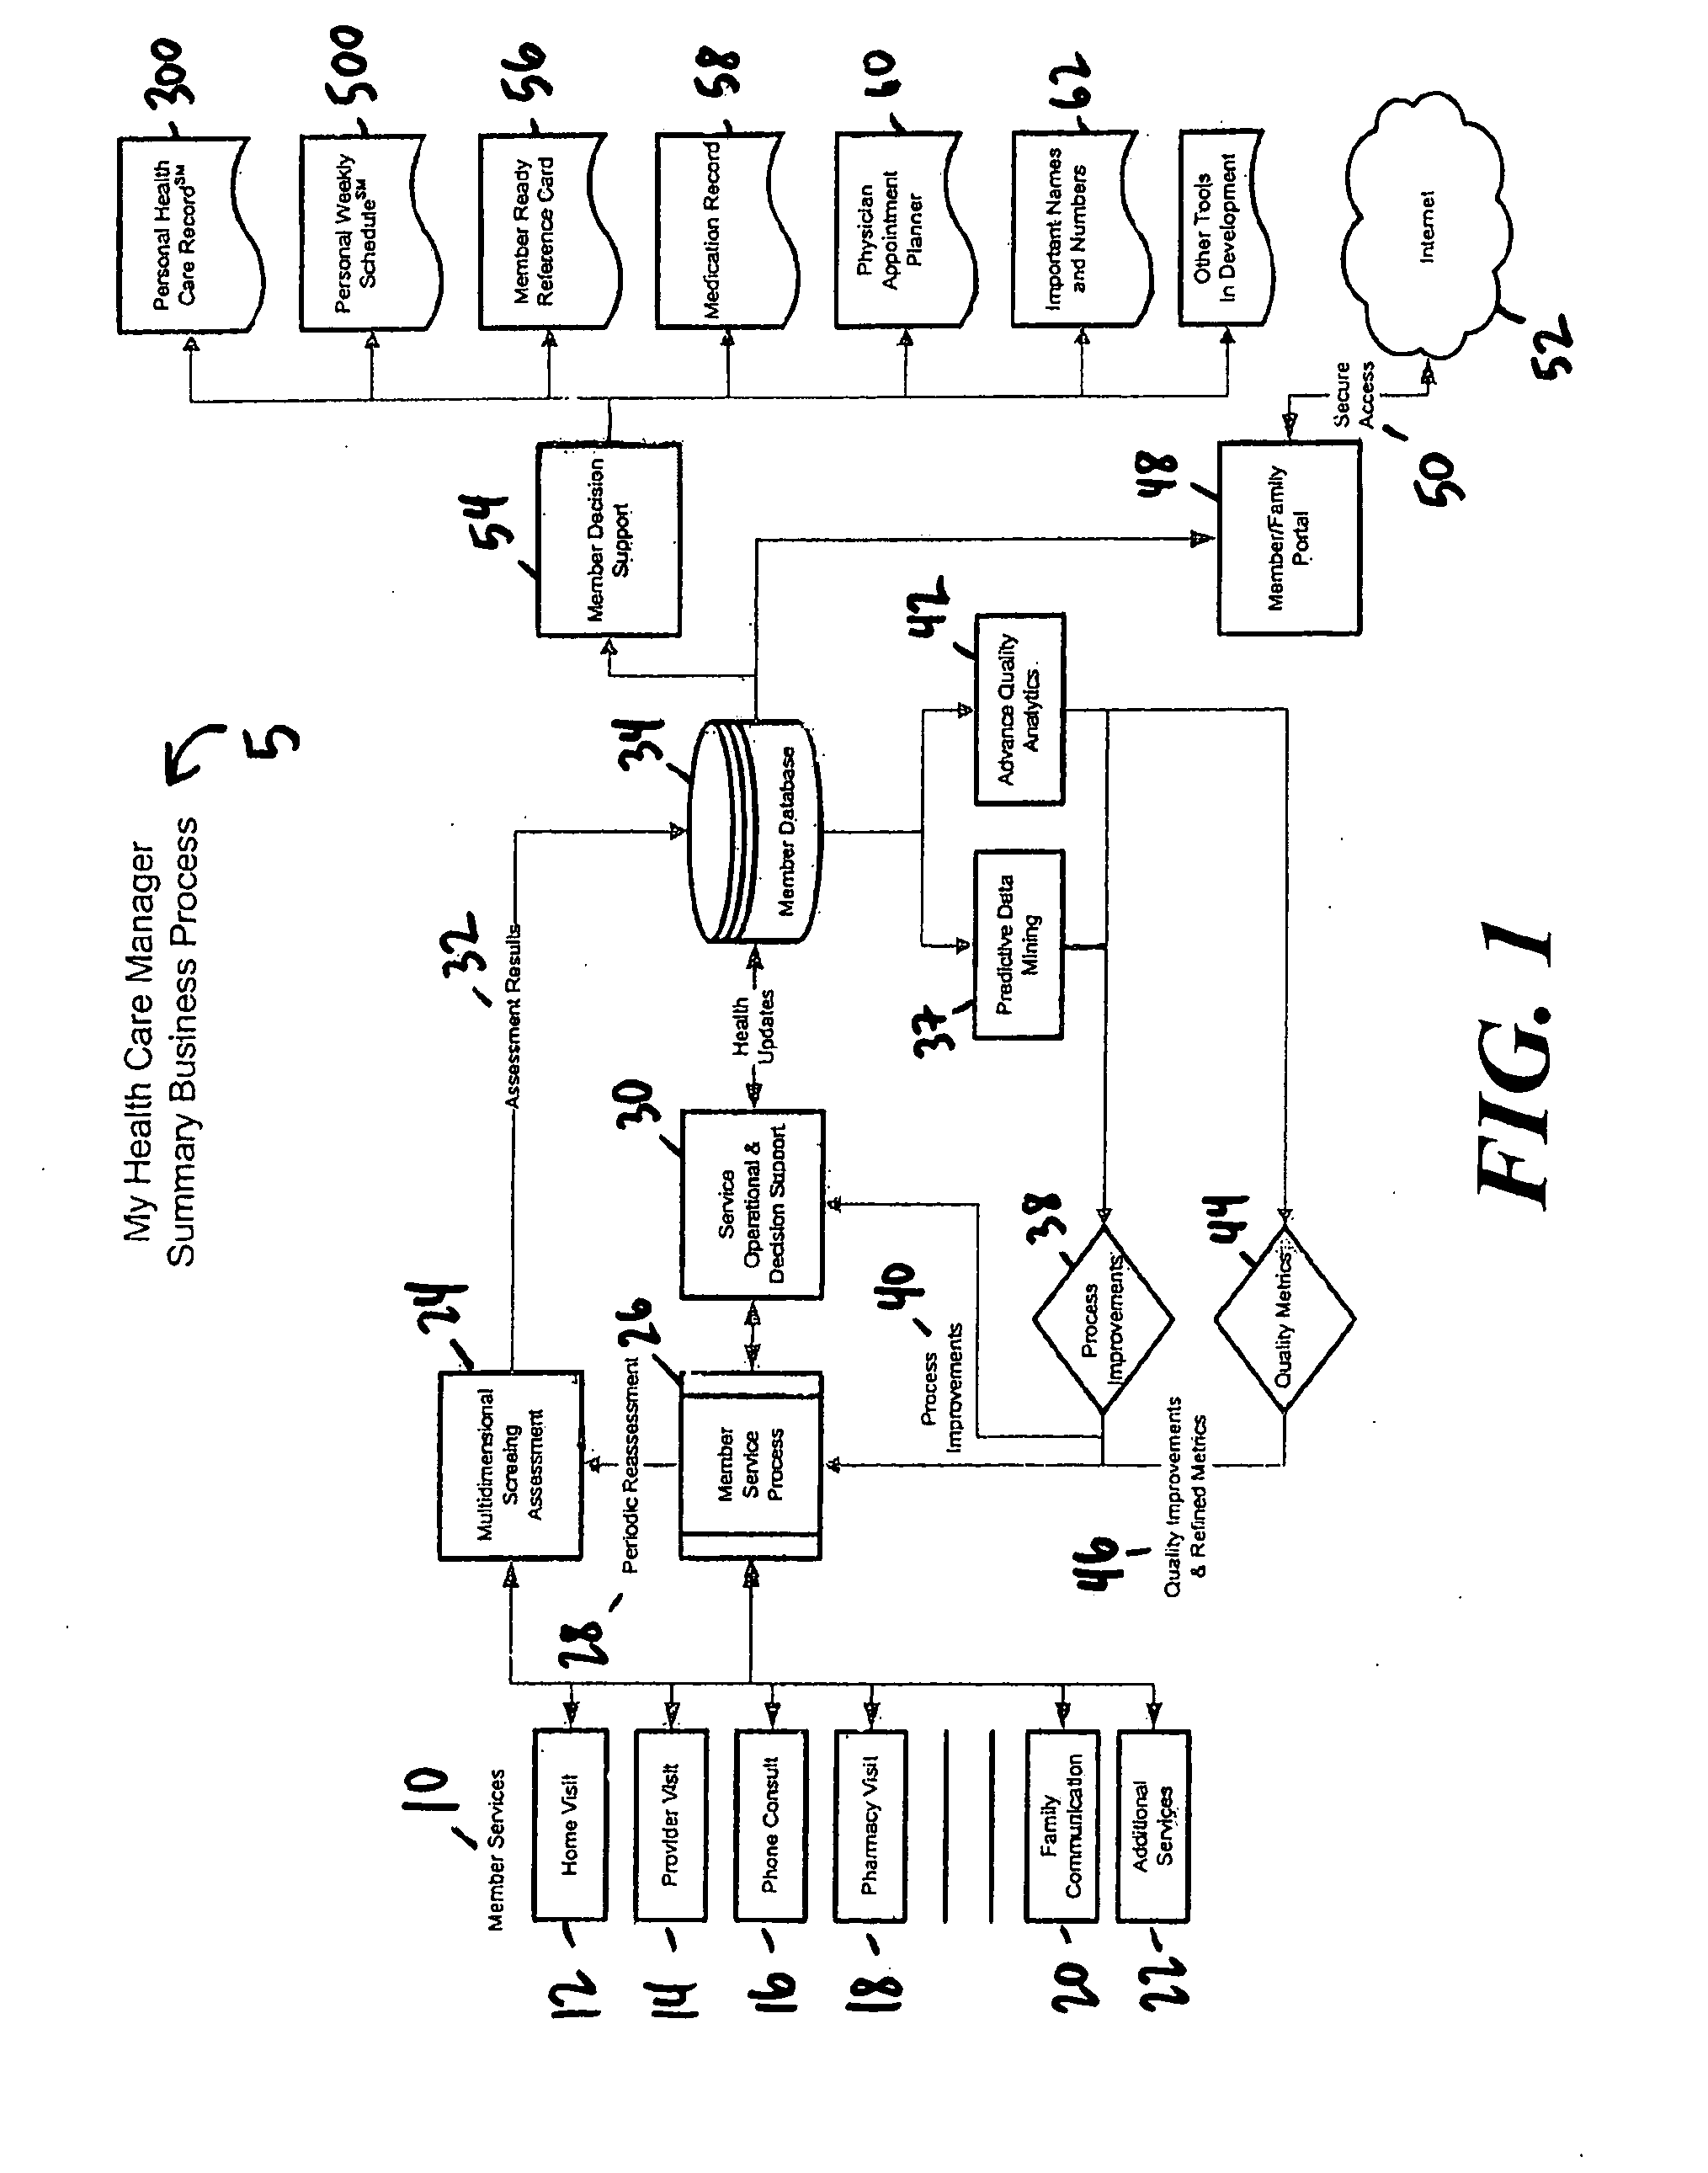 Health information management system and method